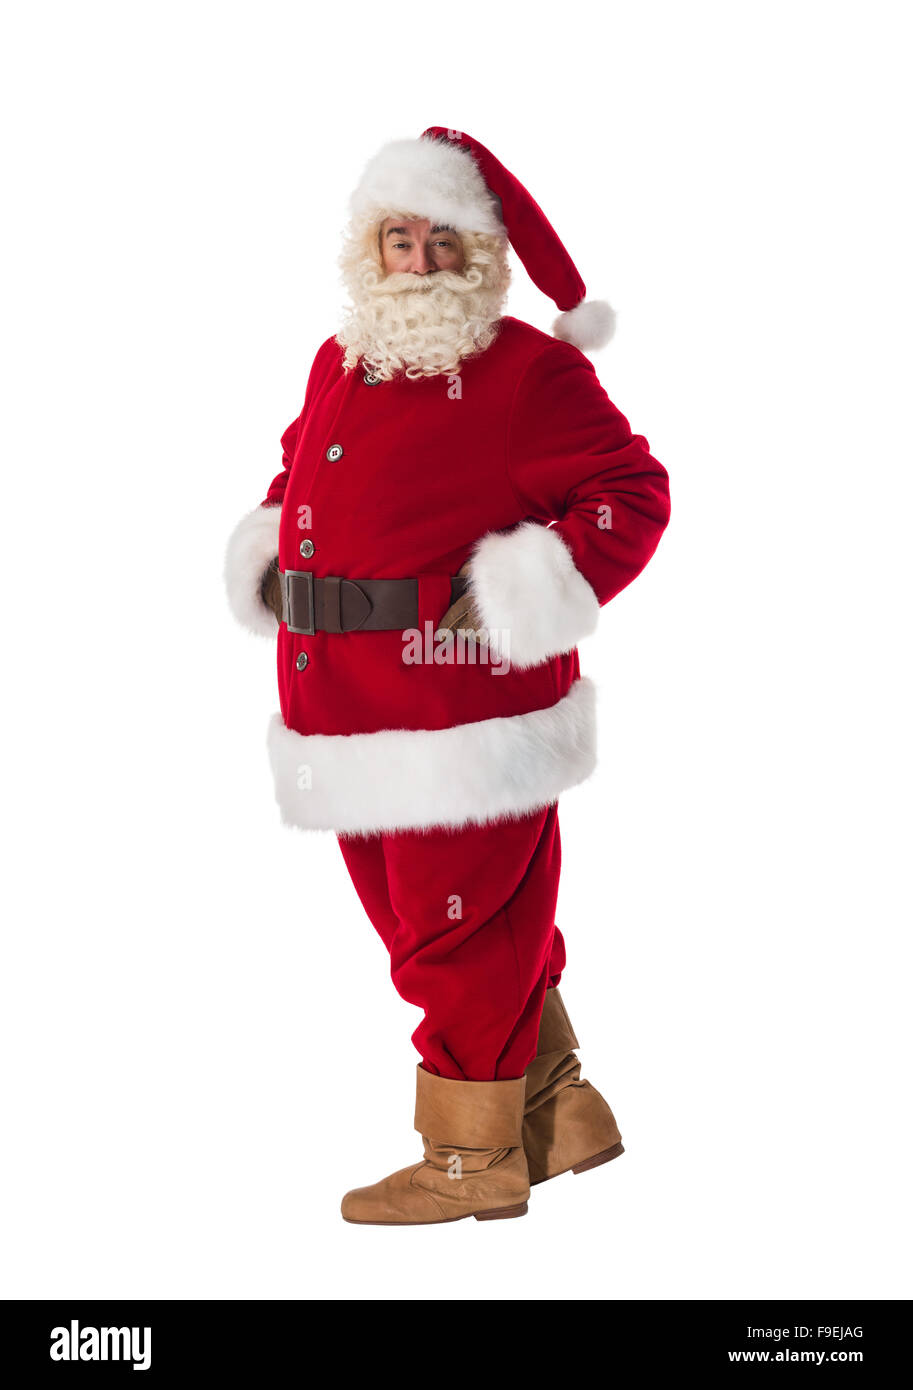 Santa Claus Portrait. Standing still and posing. Side view Stock Photo